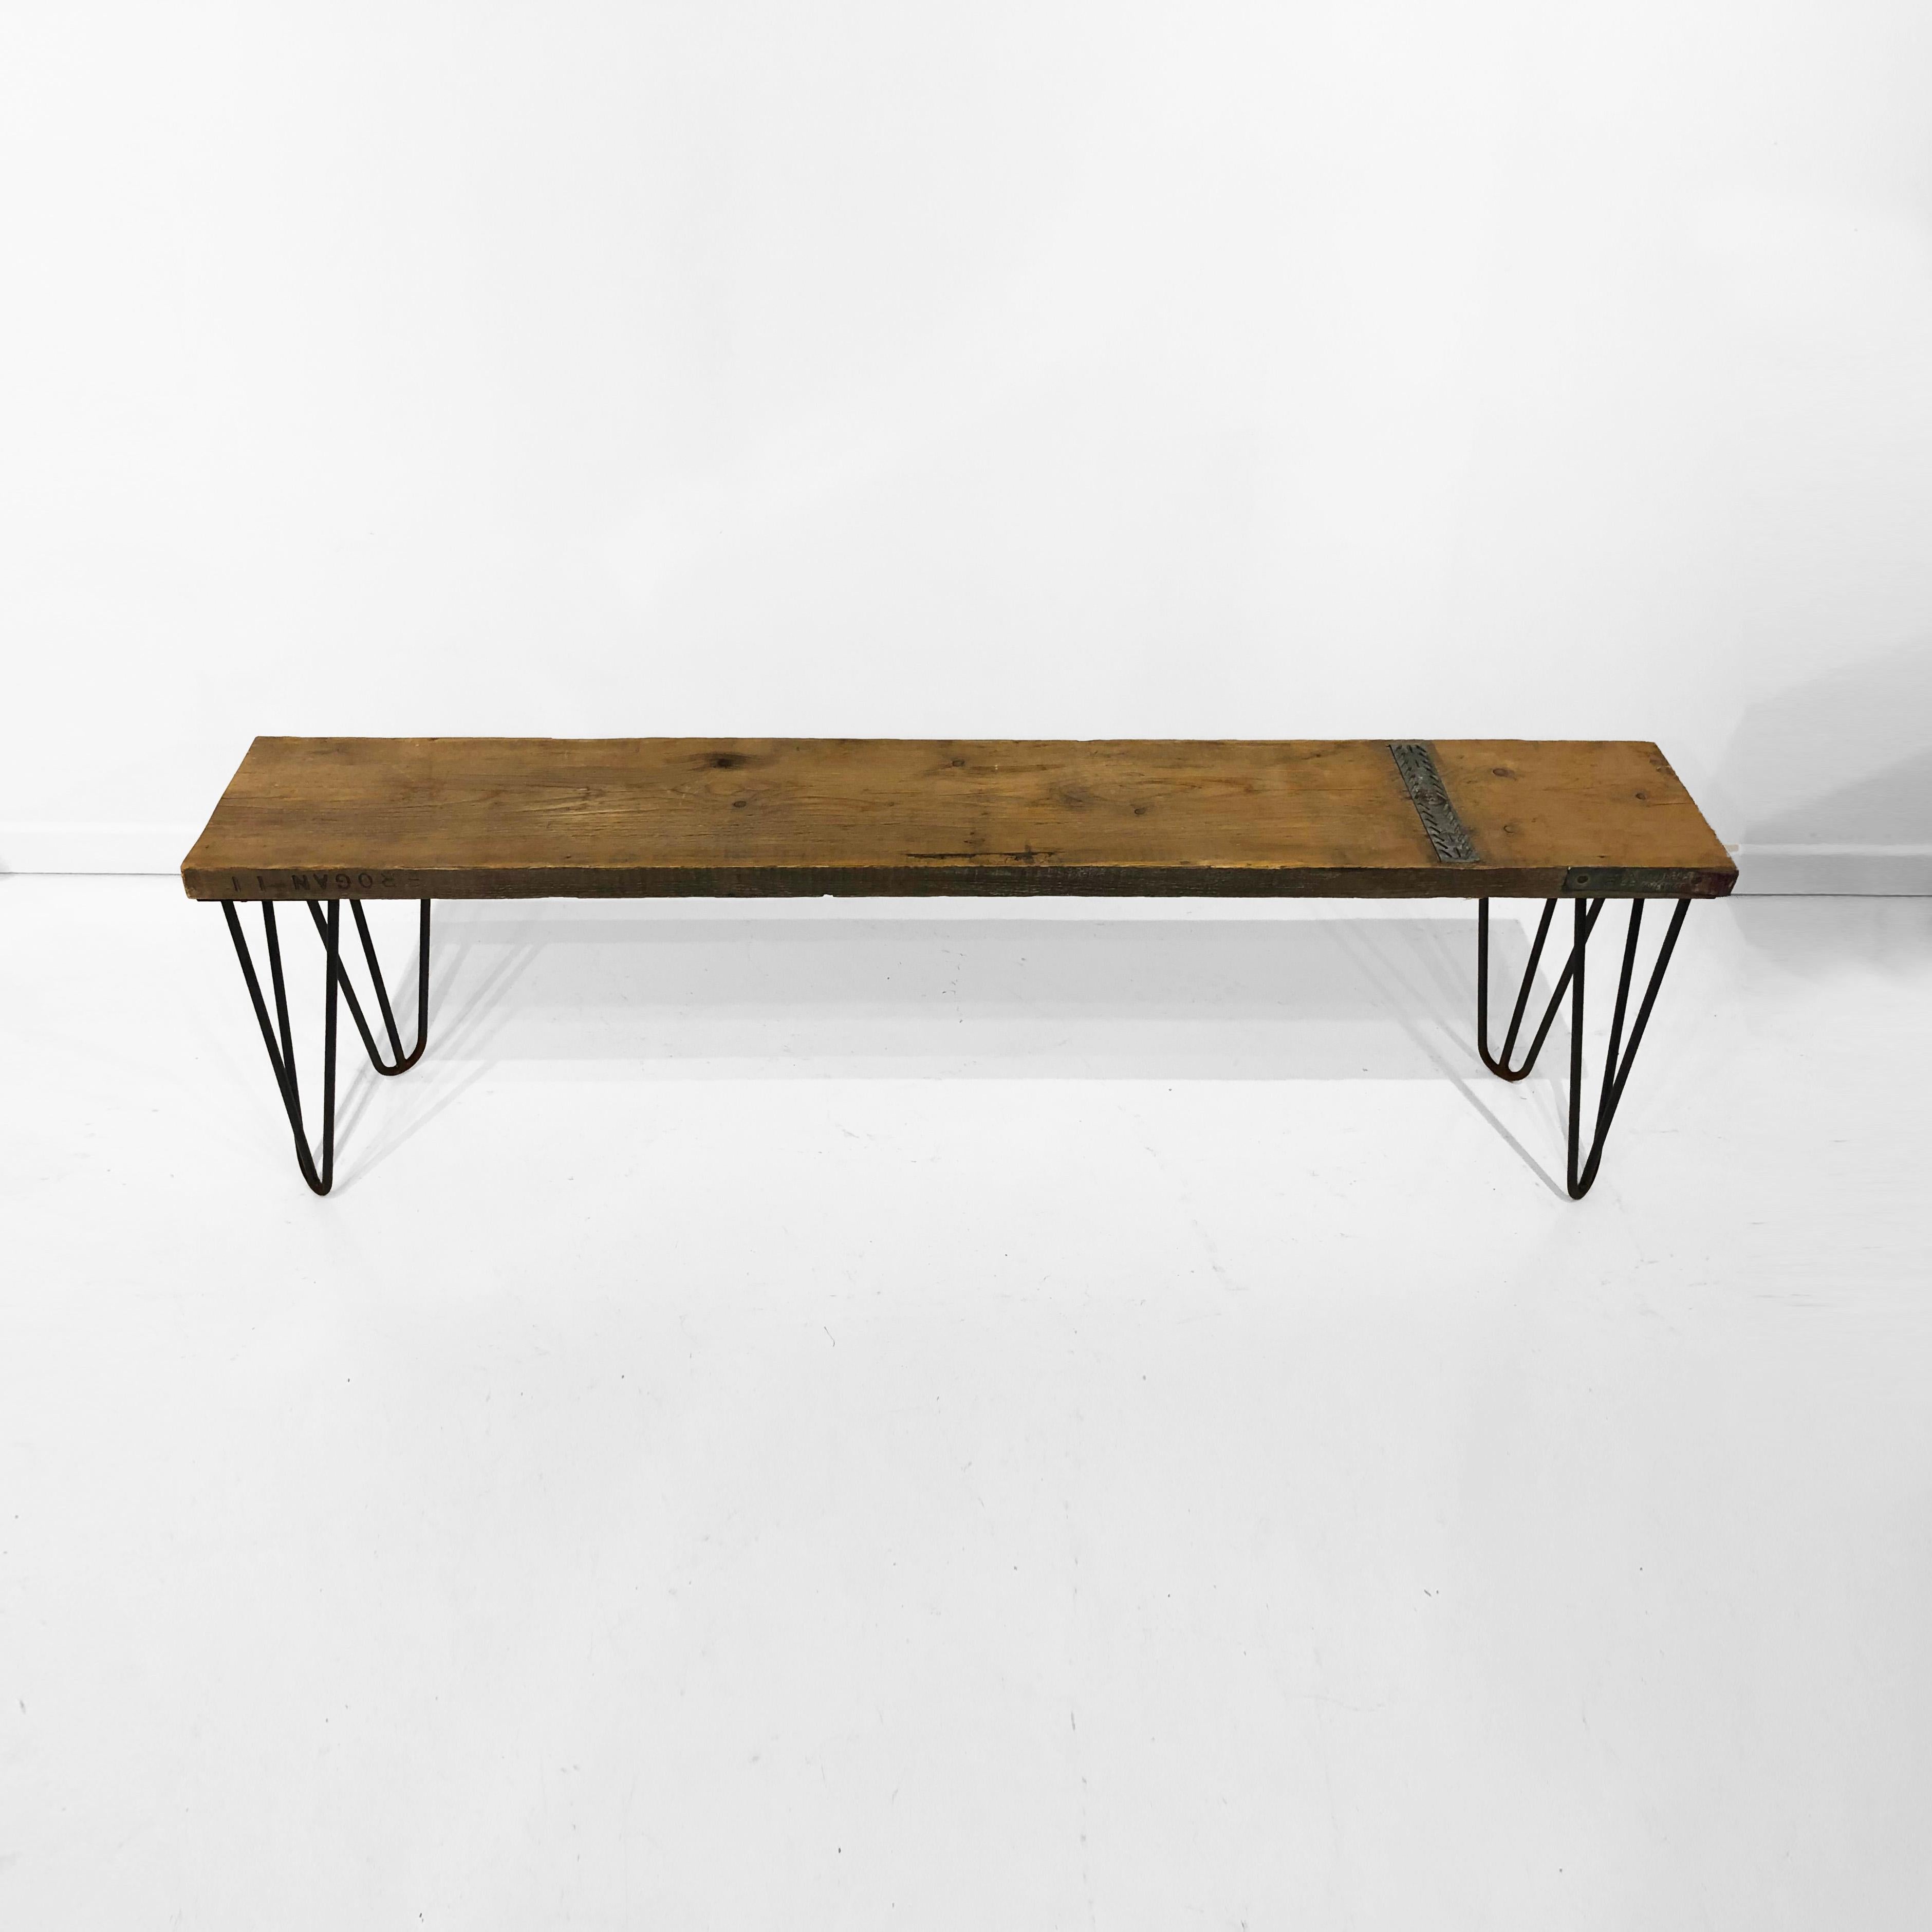 Early 21st century industrial bench made out of scaffolding wood and hairpin legs. Industrial midcentury inspired, it would look perfect either indoors or outdoors as its weather resistant. The bench has embossed manufacturers letters with nice